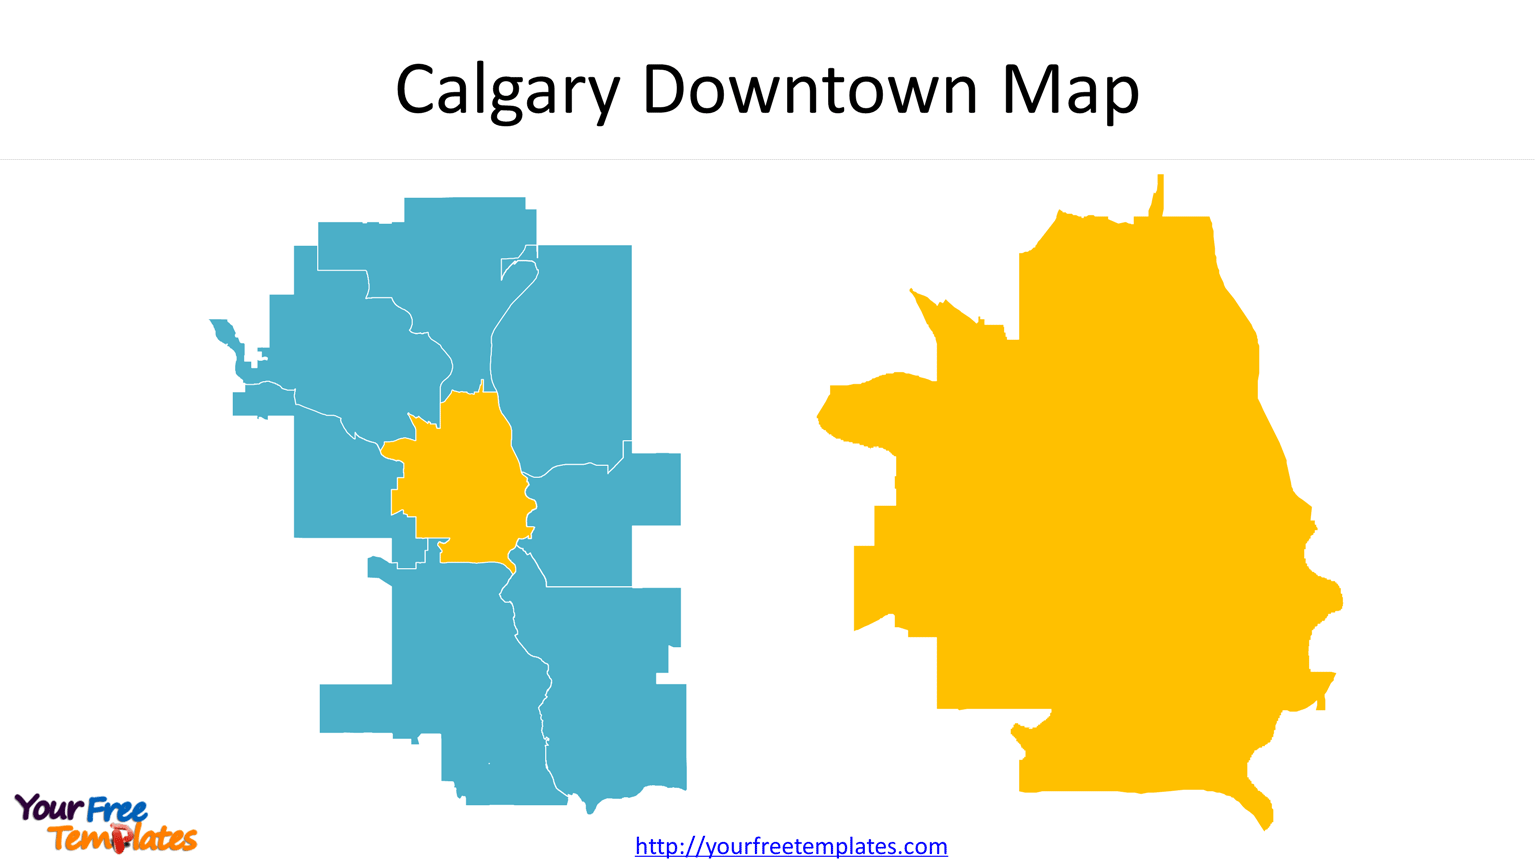 Calgary Downtown Map with 62 communities